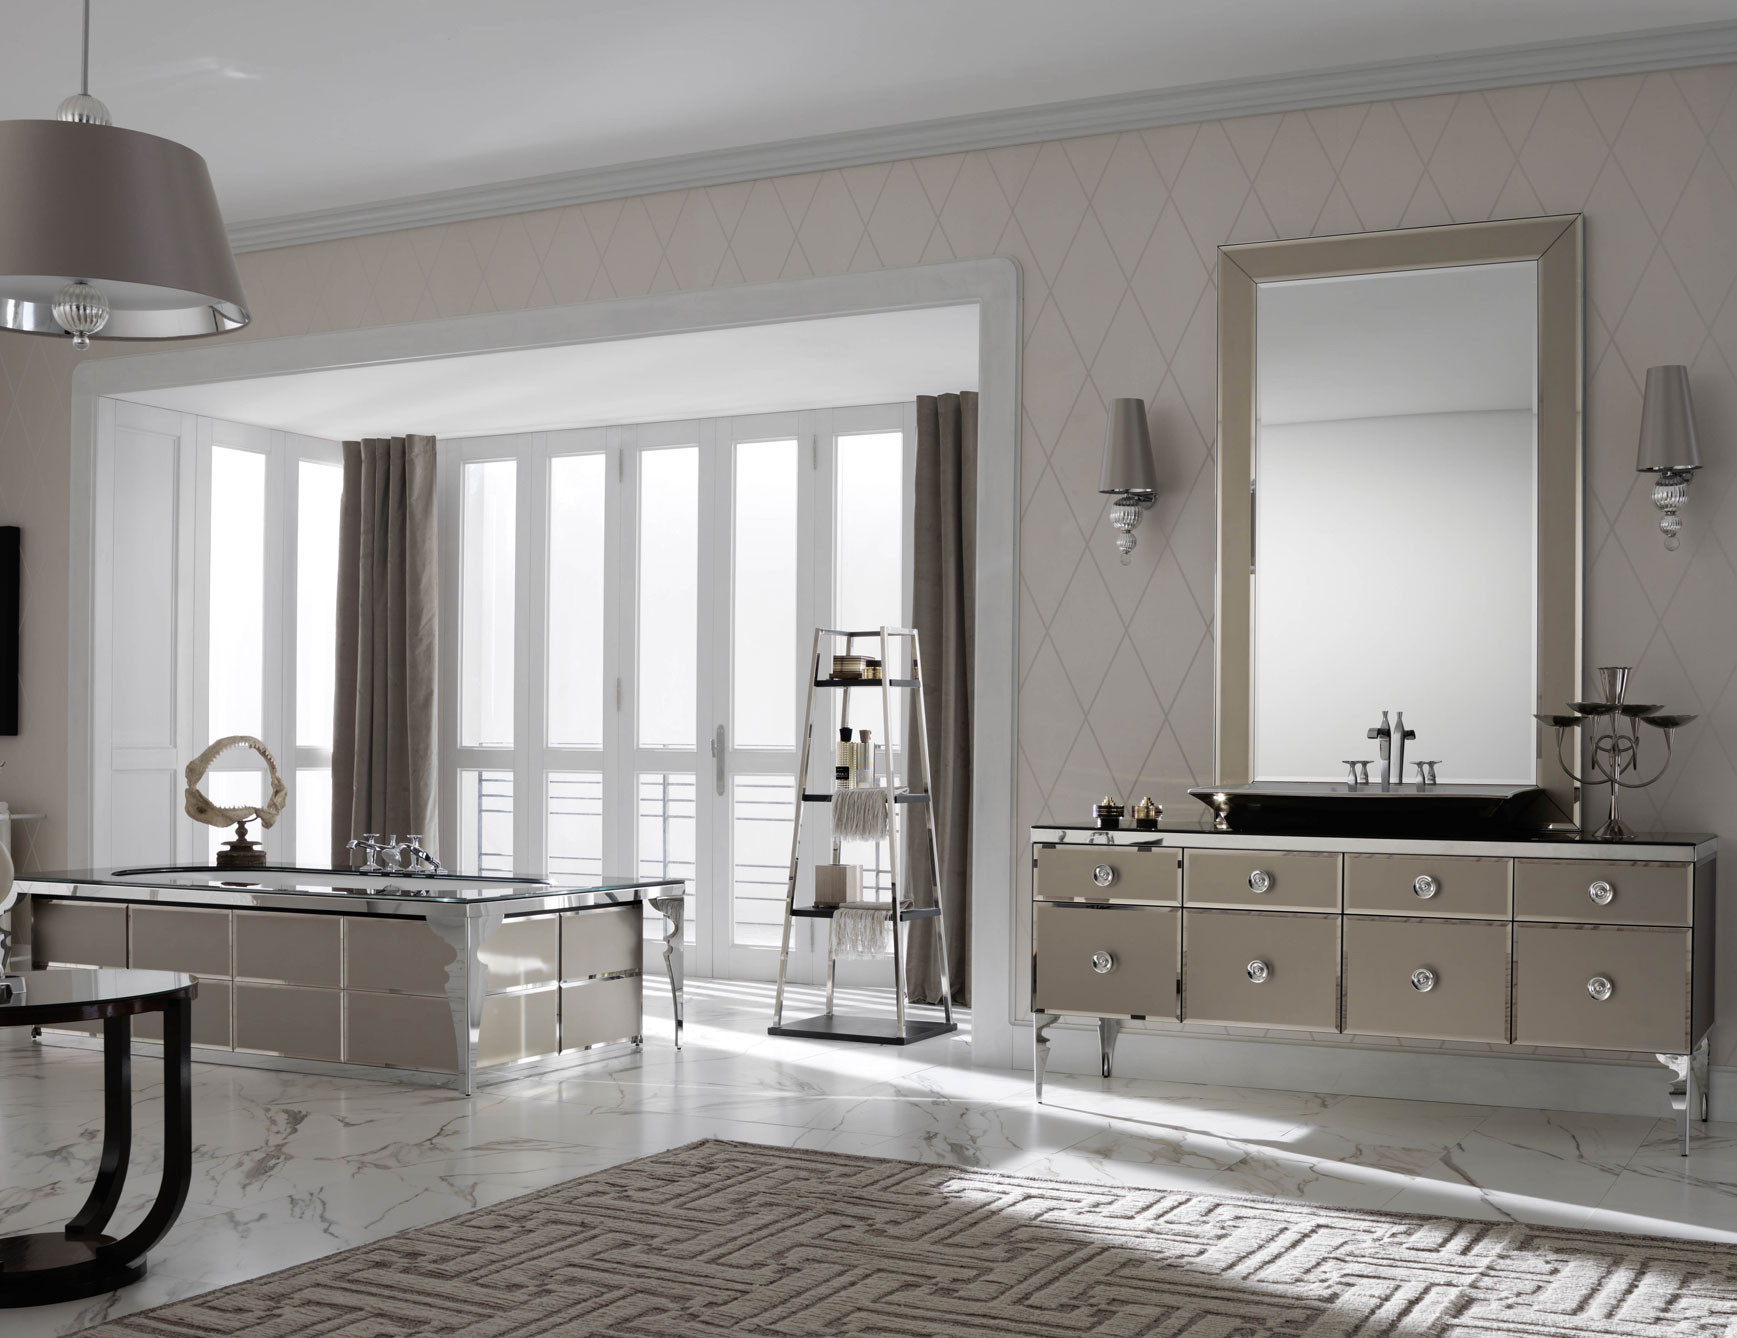 High End Bathroom Vanities
 Milldue Majestic 10 Bronze Lacquered Glass High End